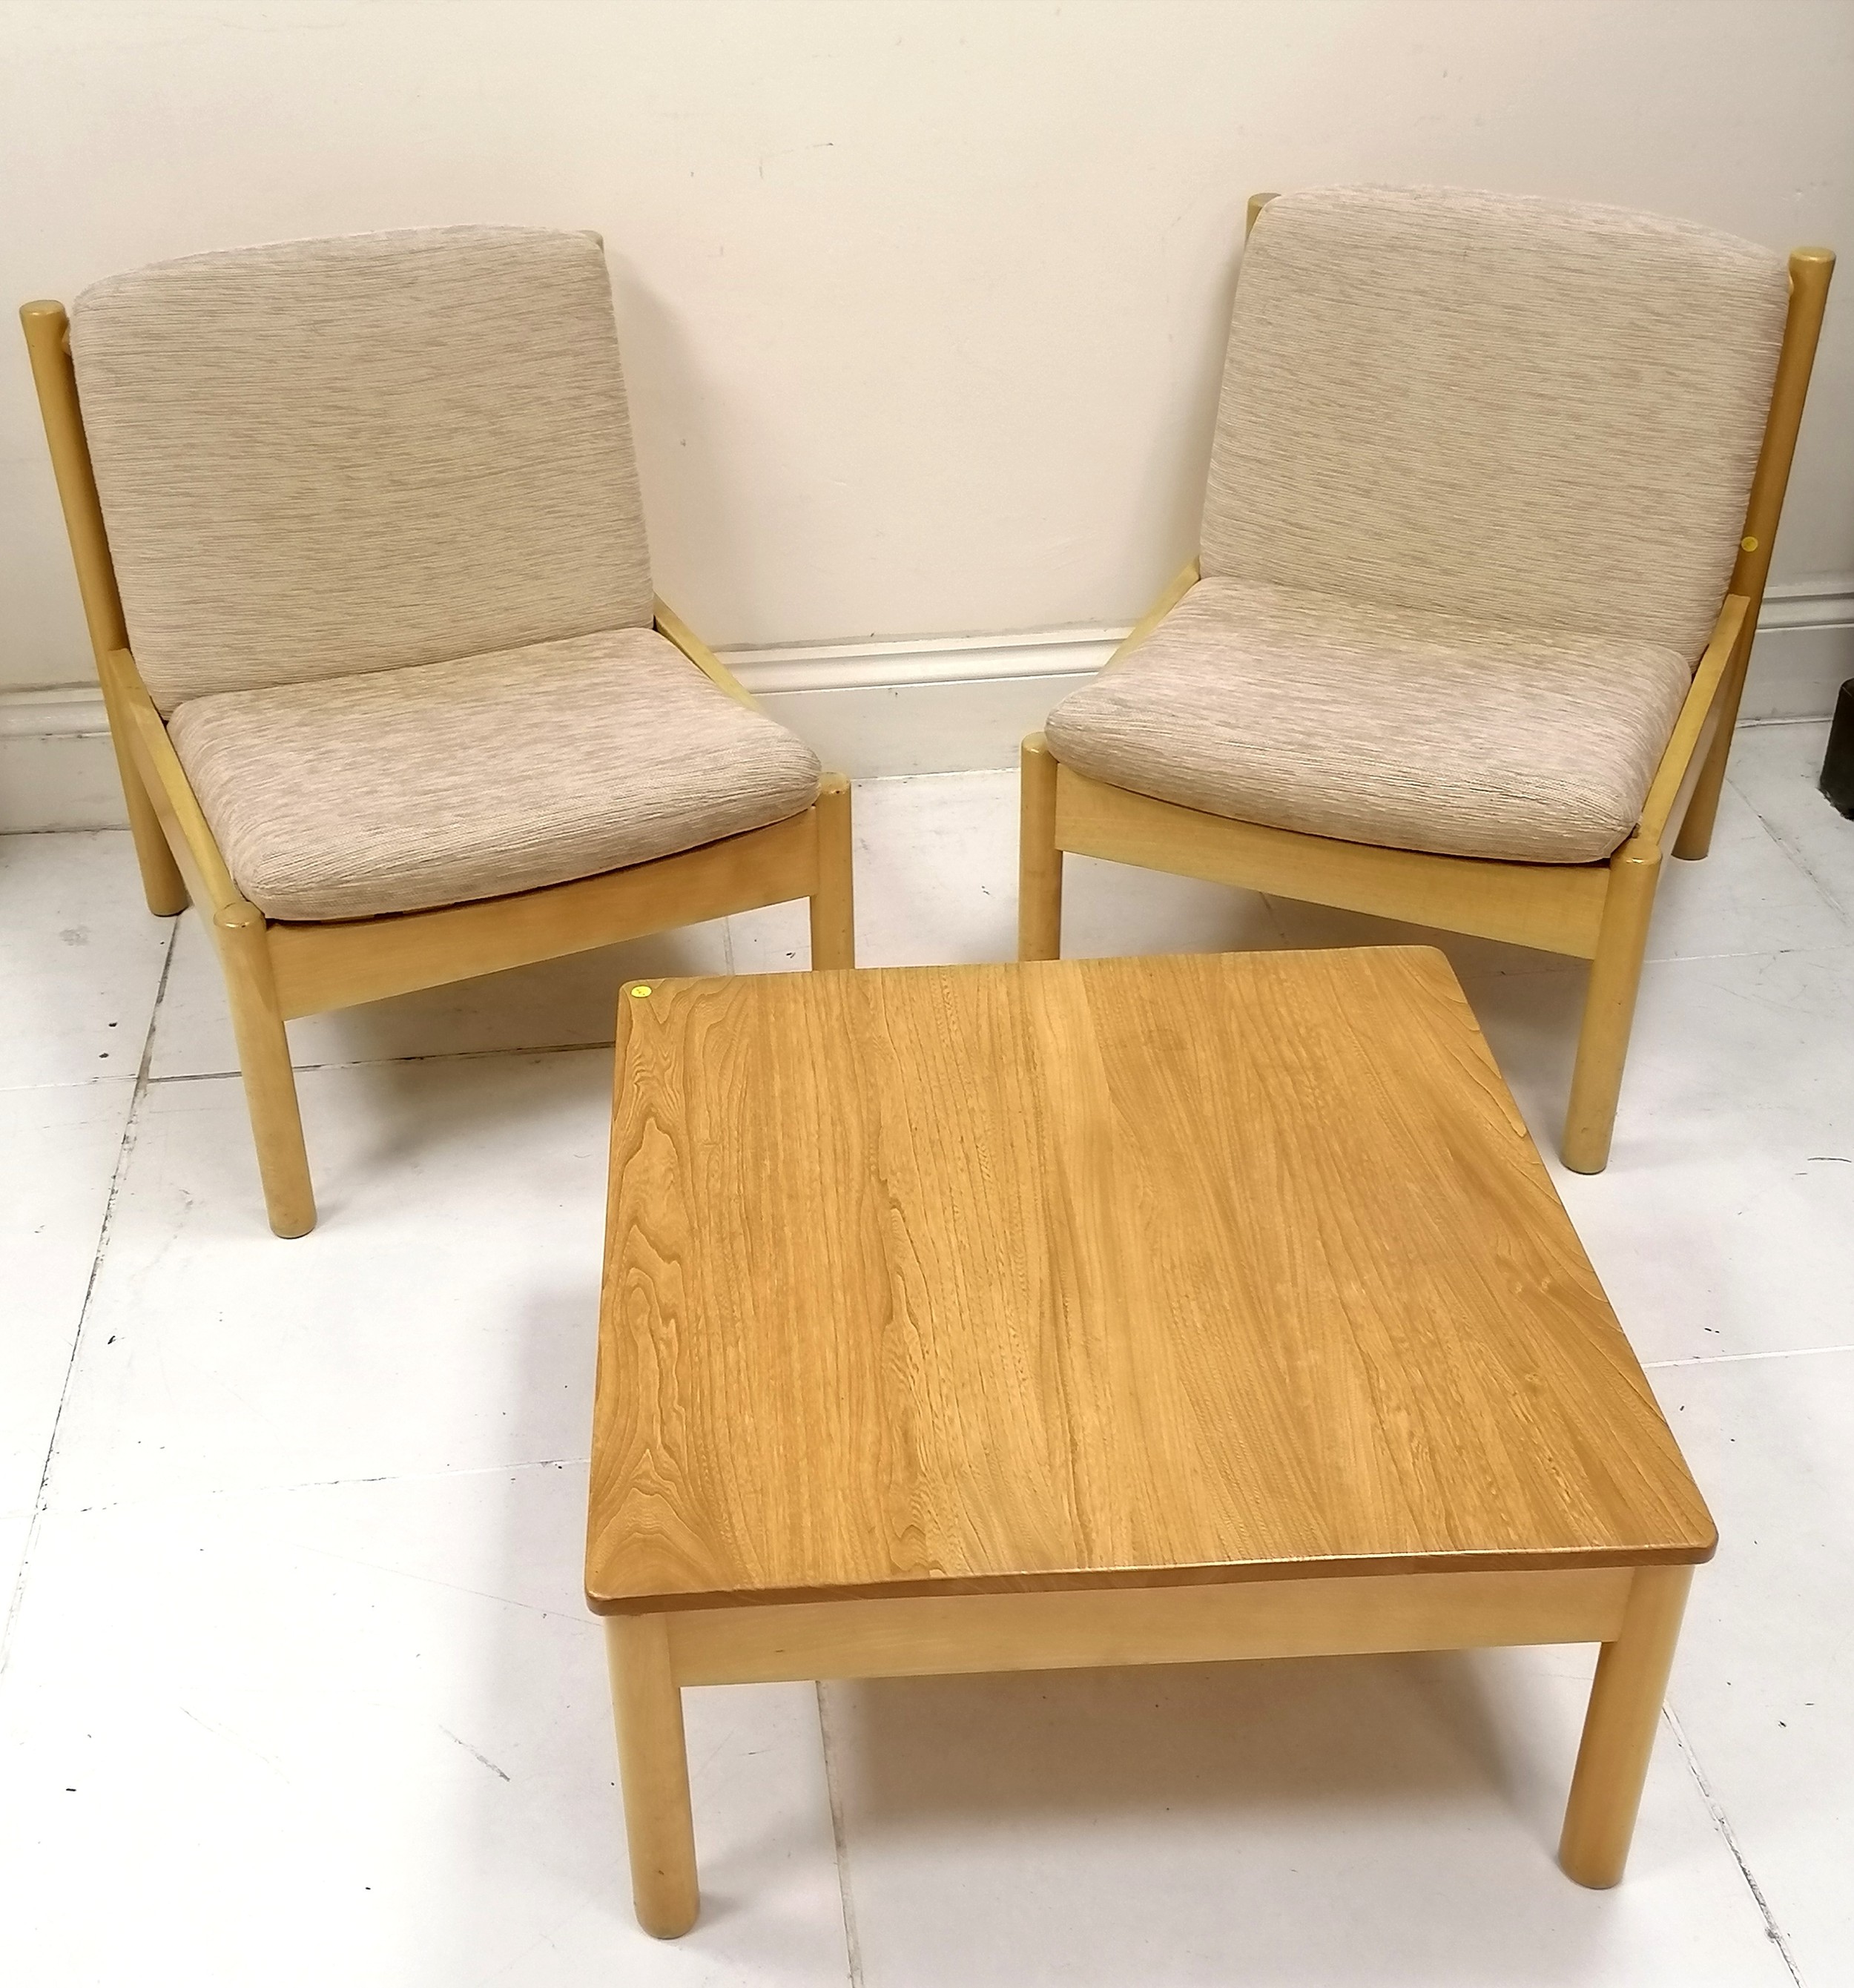 Pair of Blonde Elm Ercol easy chairs, with original oatmeal coloured upholstered cushions. in good